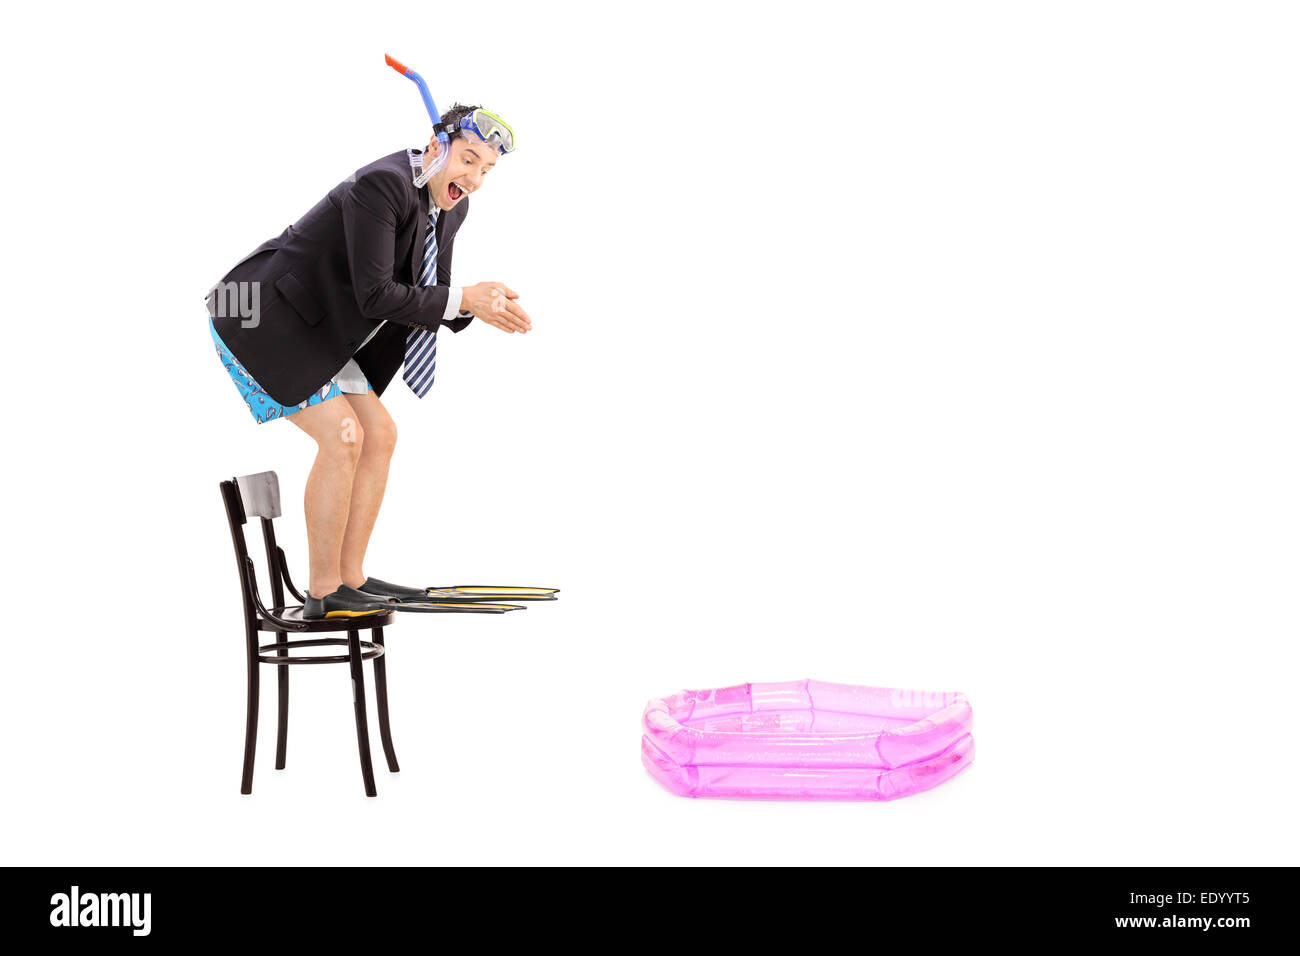 Young businessman ready to jump into a baby pool isolated on white background Stock Photo